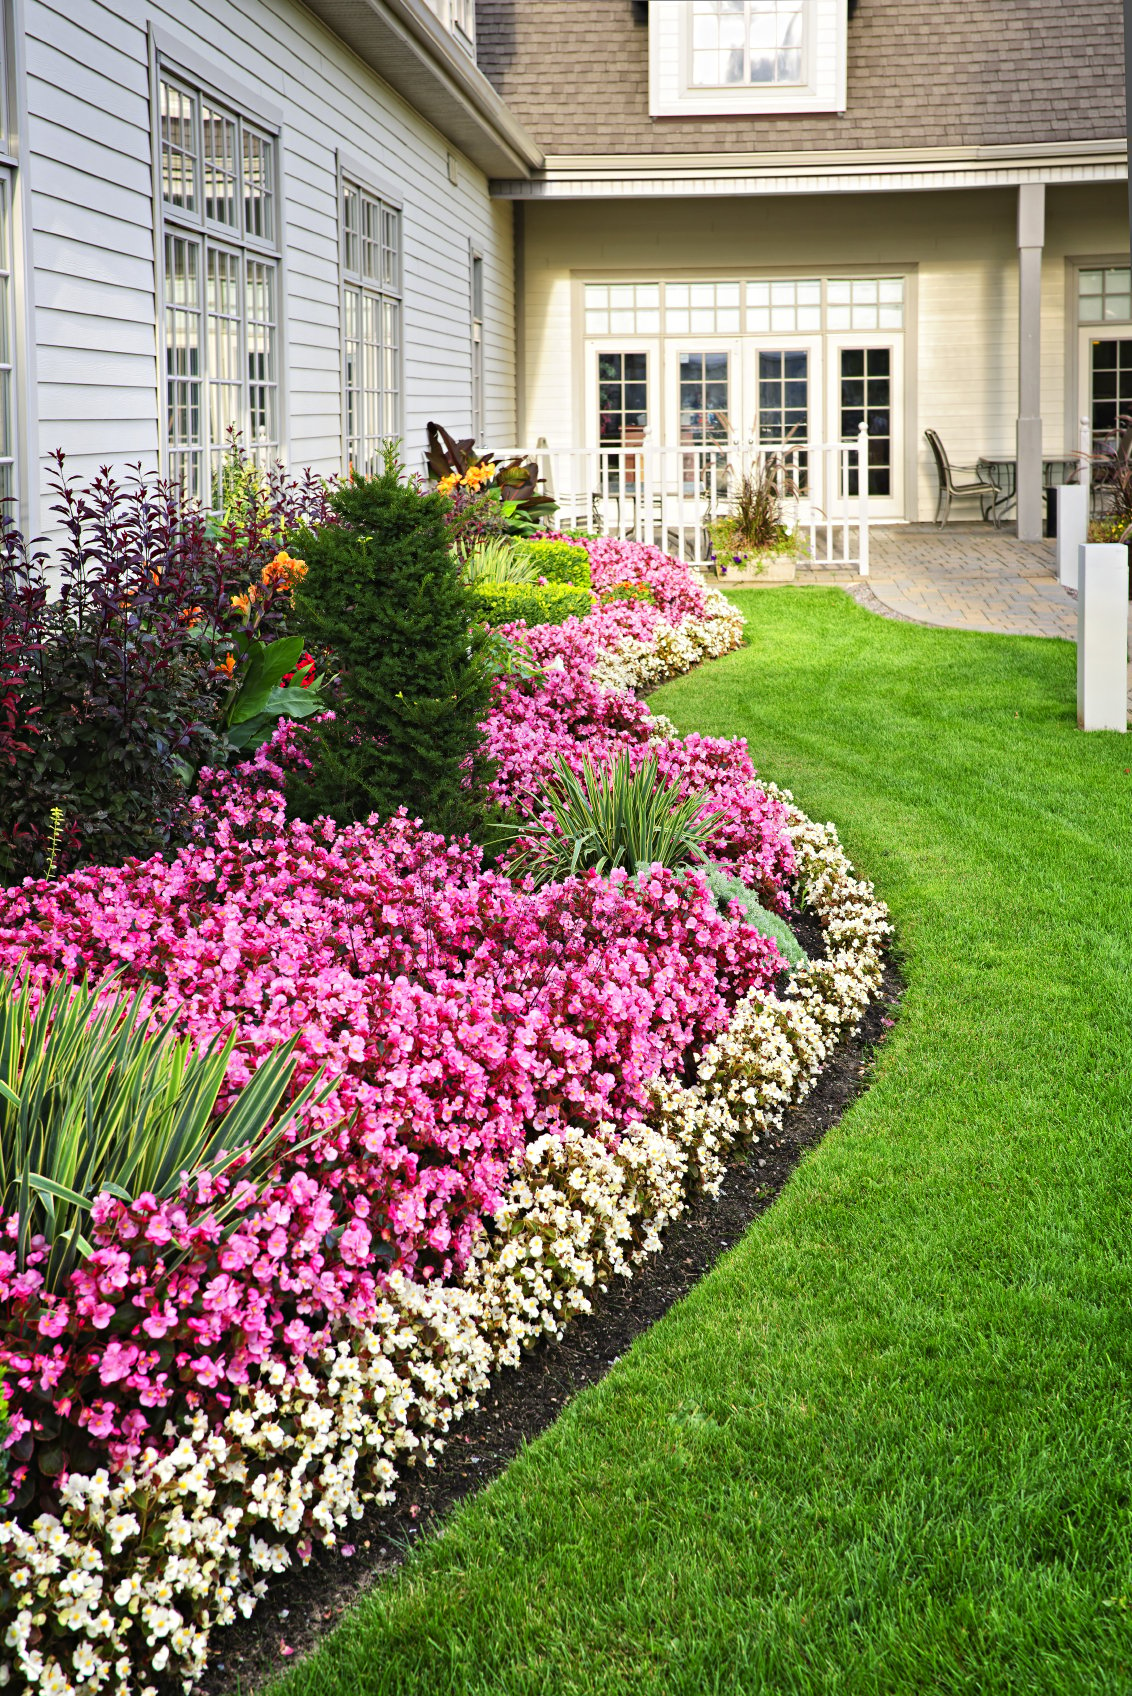 10 Inspirational Residential Landscaping Ideas To Make Your Yard Stand